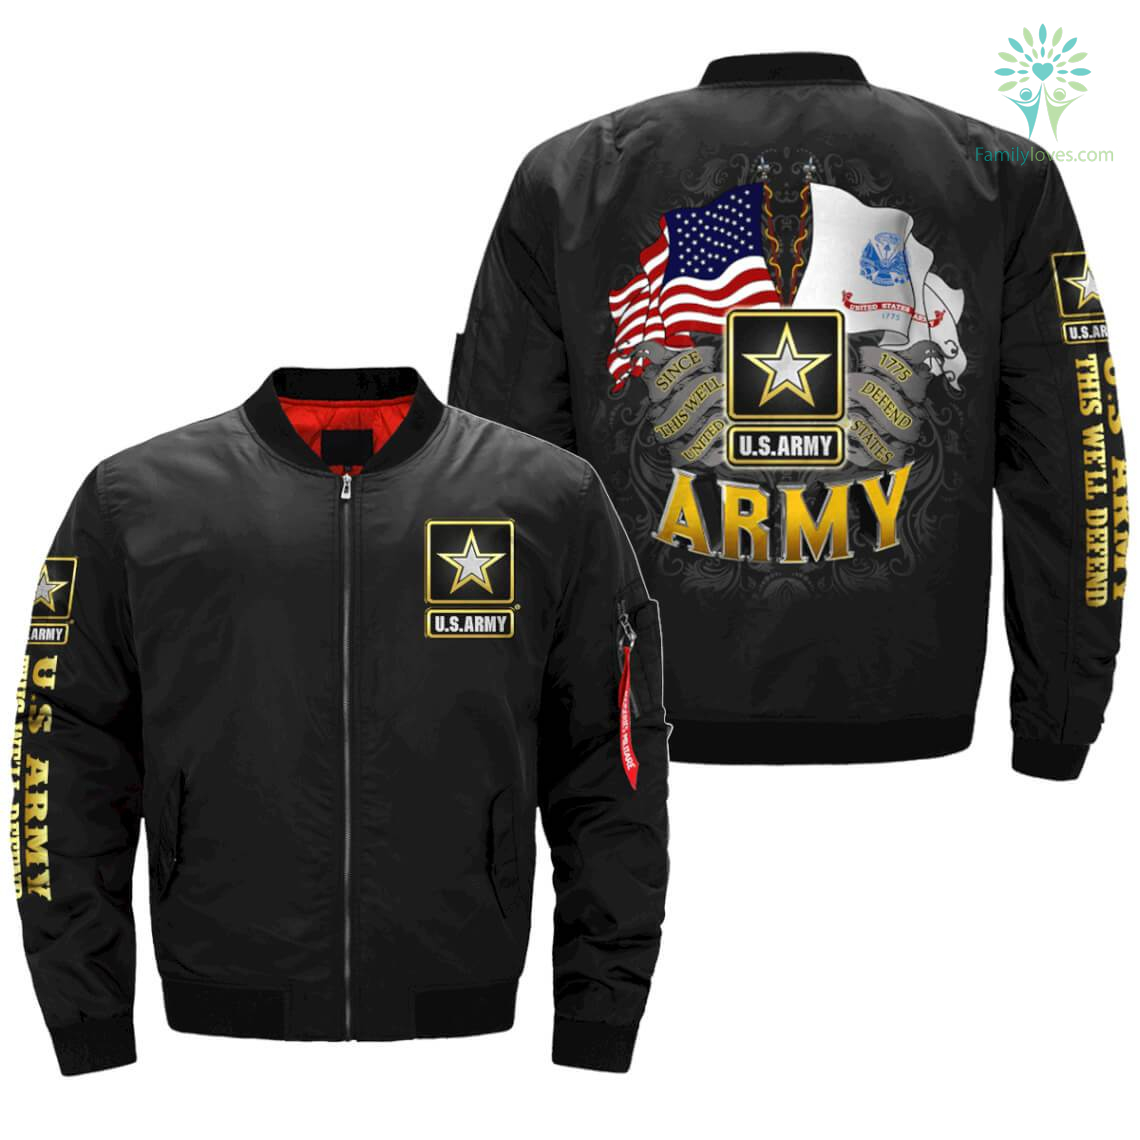 U.S.ARMY, SINCE 1775 THIS WE'LL DEFEND UNITED STATES V2.0 OVER PRINT ...